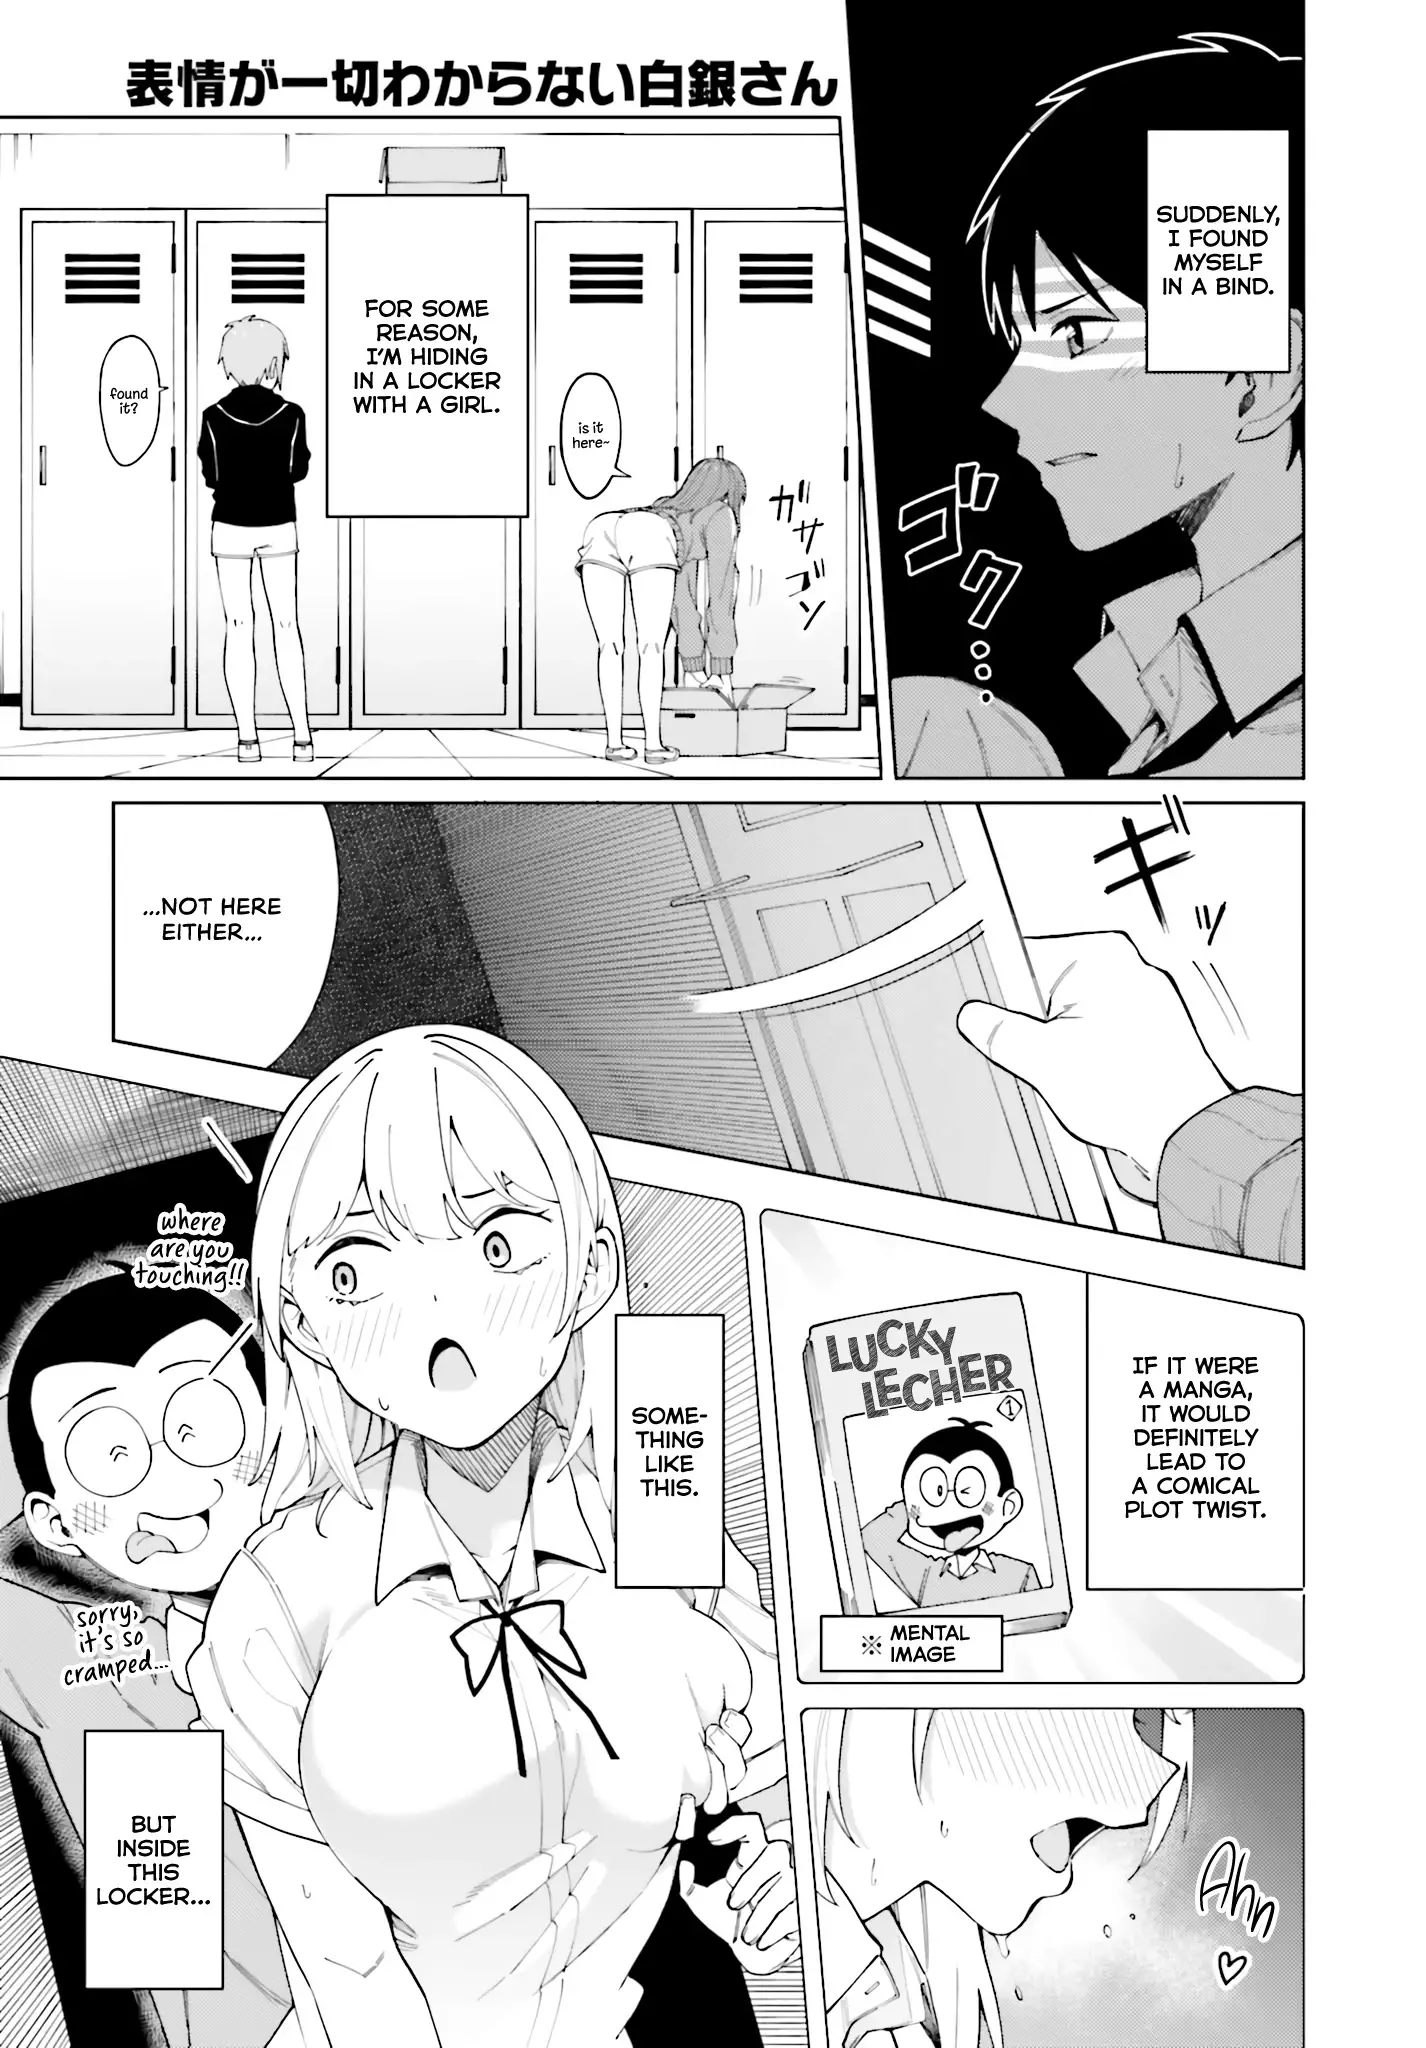 I Don't Understand Shirogane-San's Facial Expression At All - 1 page 1